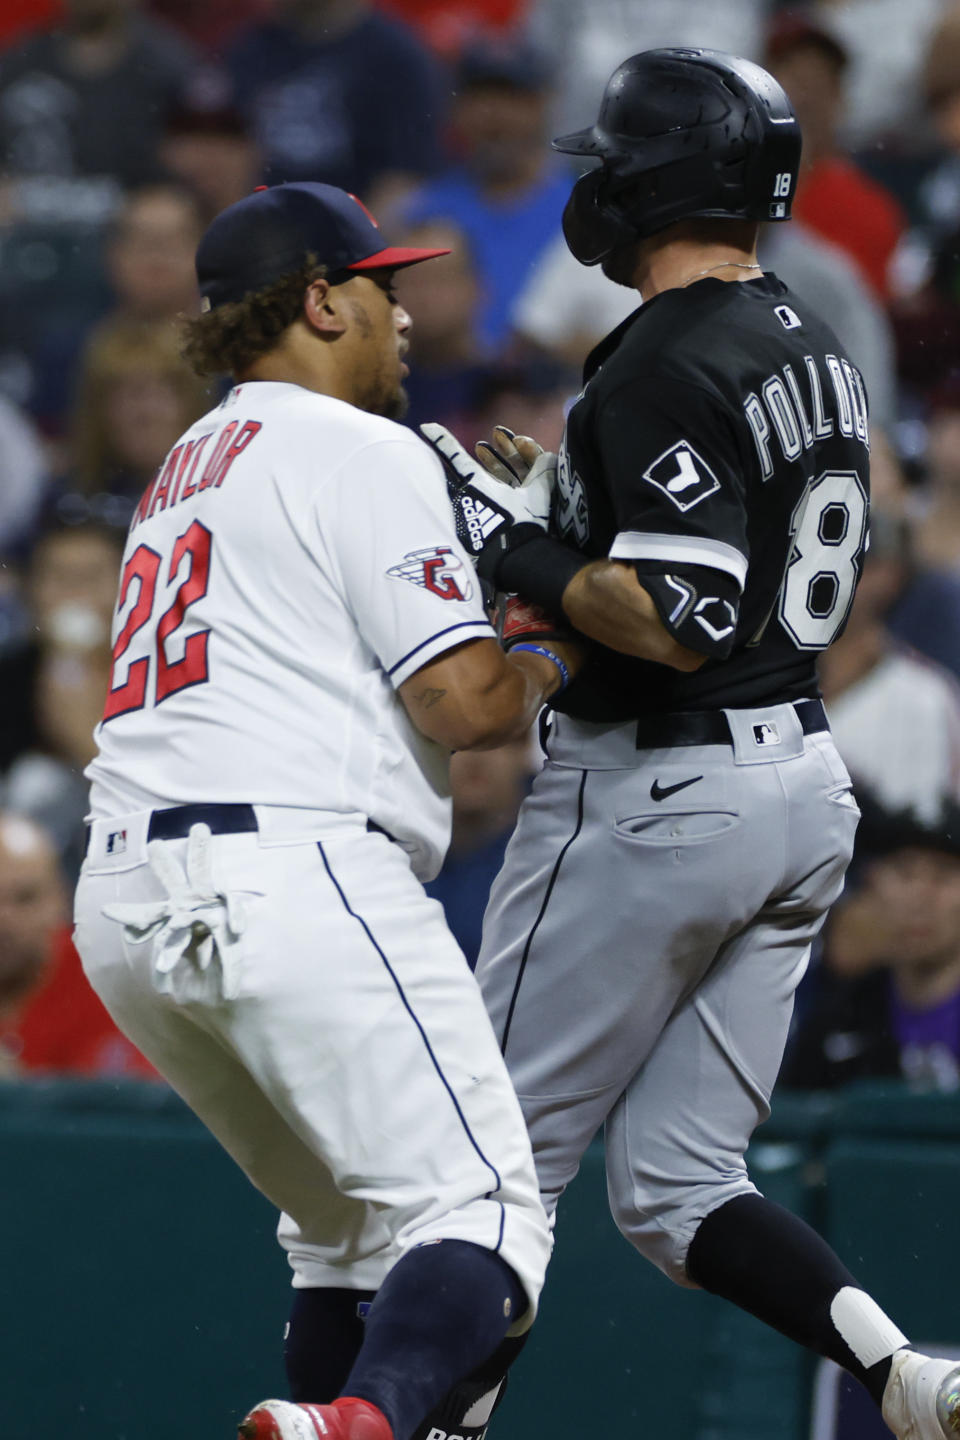 Cleveland Guardians first baseman Josh Naylor, left, tags out Chicago White Sox's AJ Pollock during the first inning of a baseball game Saturday, Aug. 20, 2022, in Cleveland. (AP Photo/Ron Schwane)